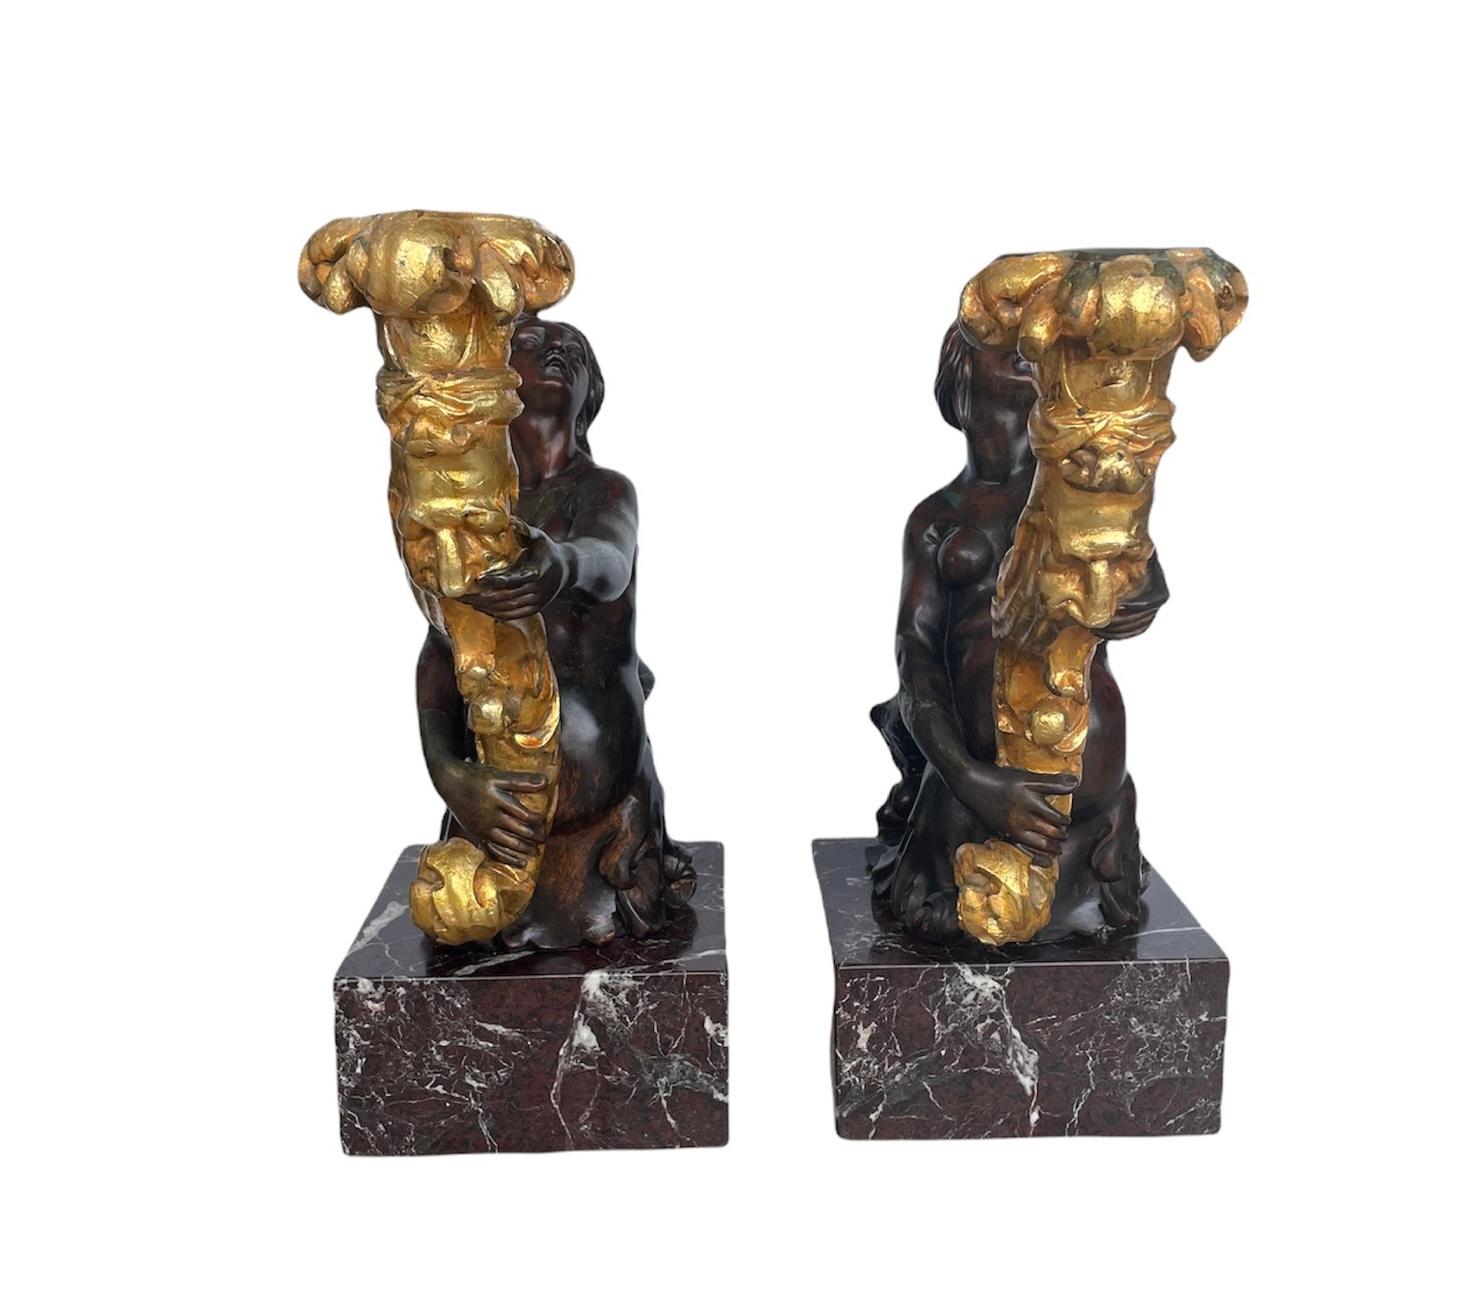 This is a pair of large heavy patinated bronze mermaids sculptures torcheres and/or candelabras. Both depict a half hair styled head and naked trunk kneeled woman with a fish scaly lower body that is holding a gilt bronze torch. Each one of them are